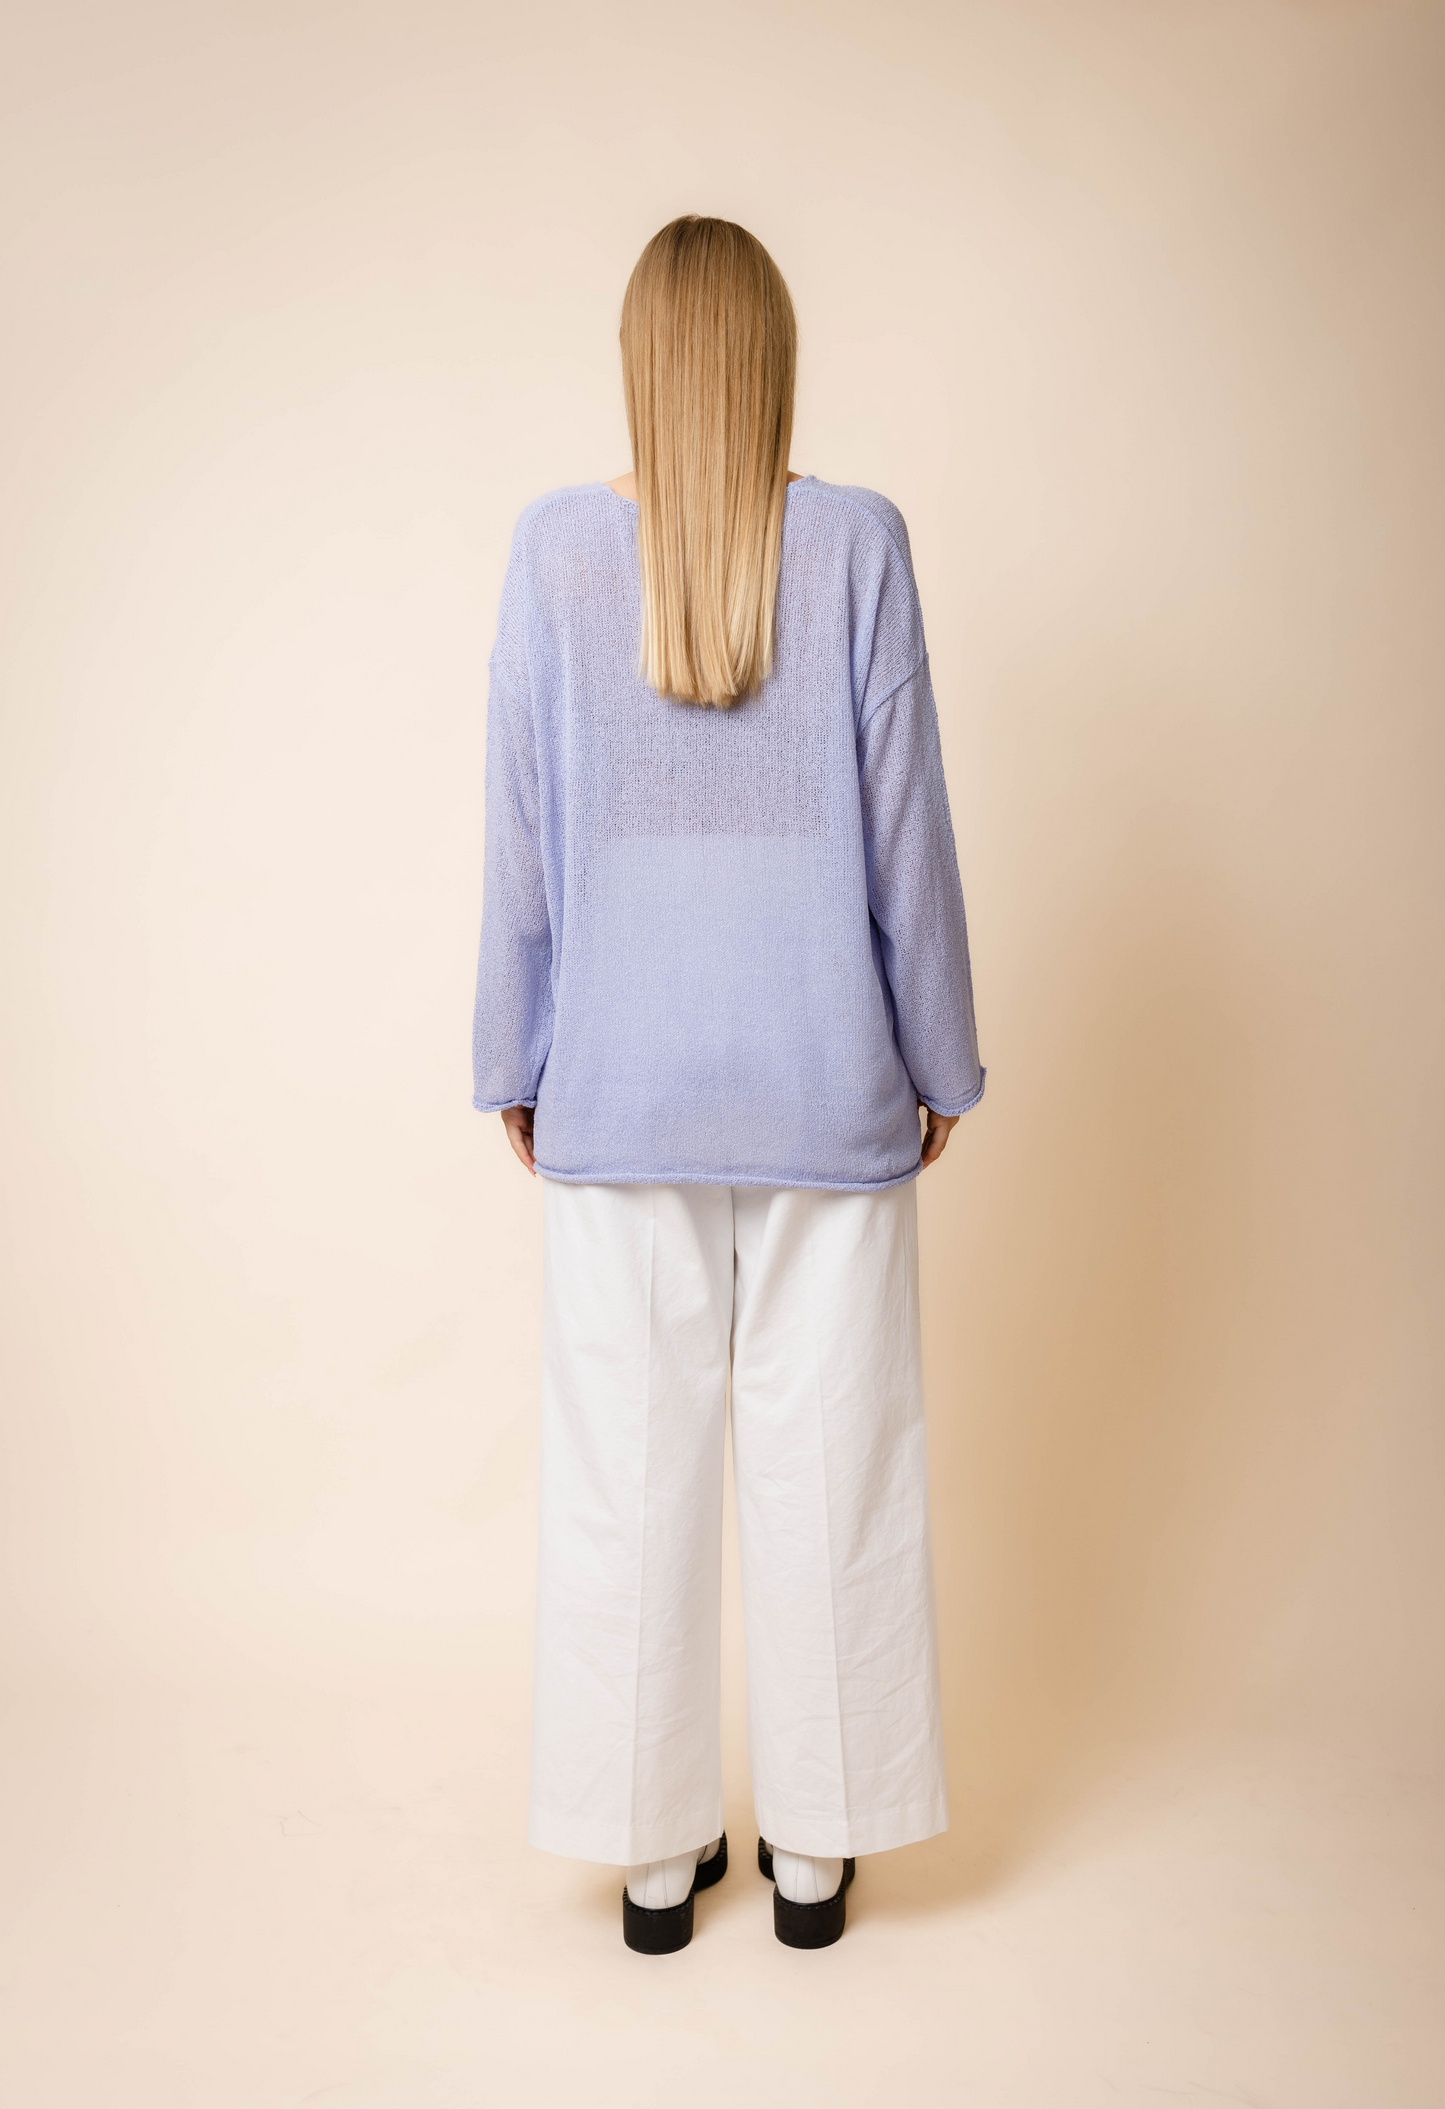 Oversized Stitch Sweater in Periwinkle